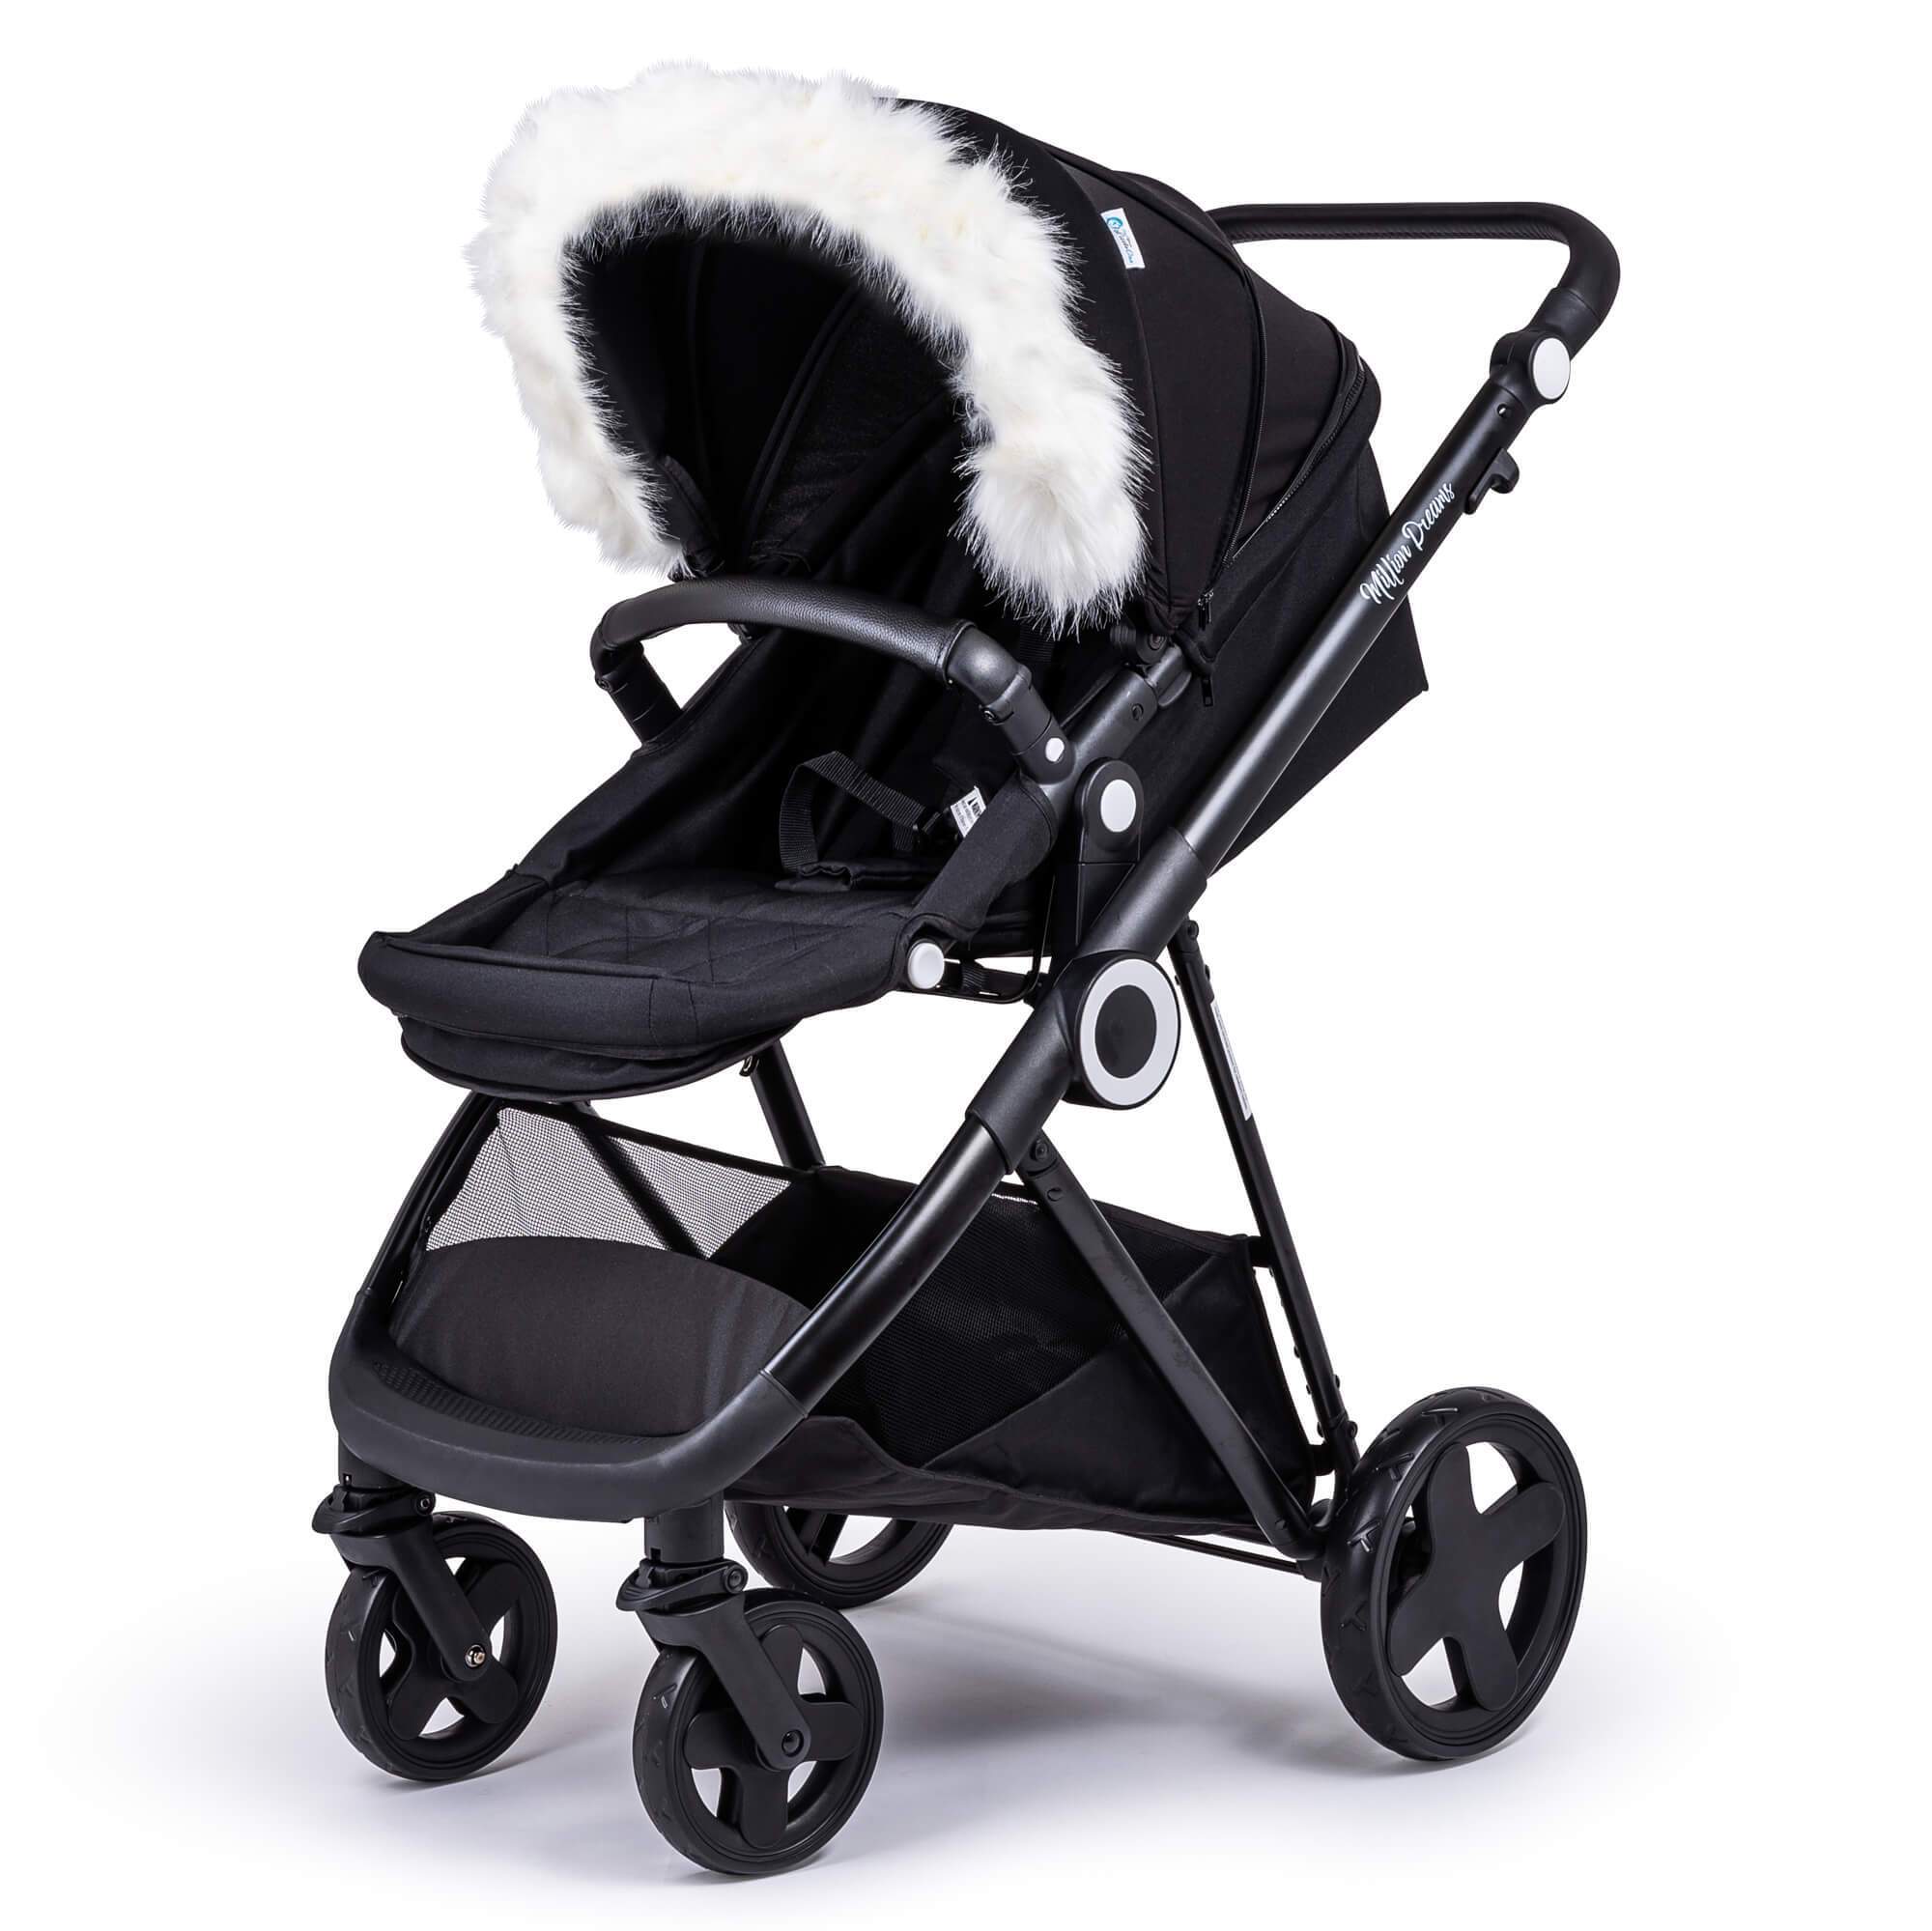 Pram Fur Hood Trim Attachment for Pushchair Compatible with Safety 1st - For Your Little One